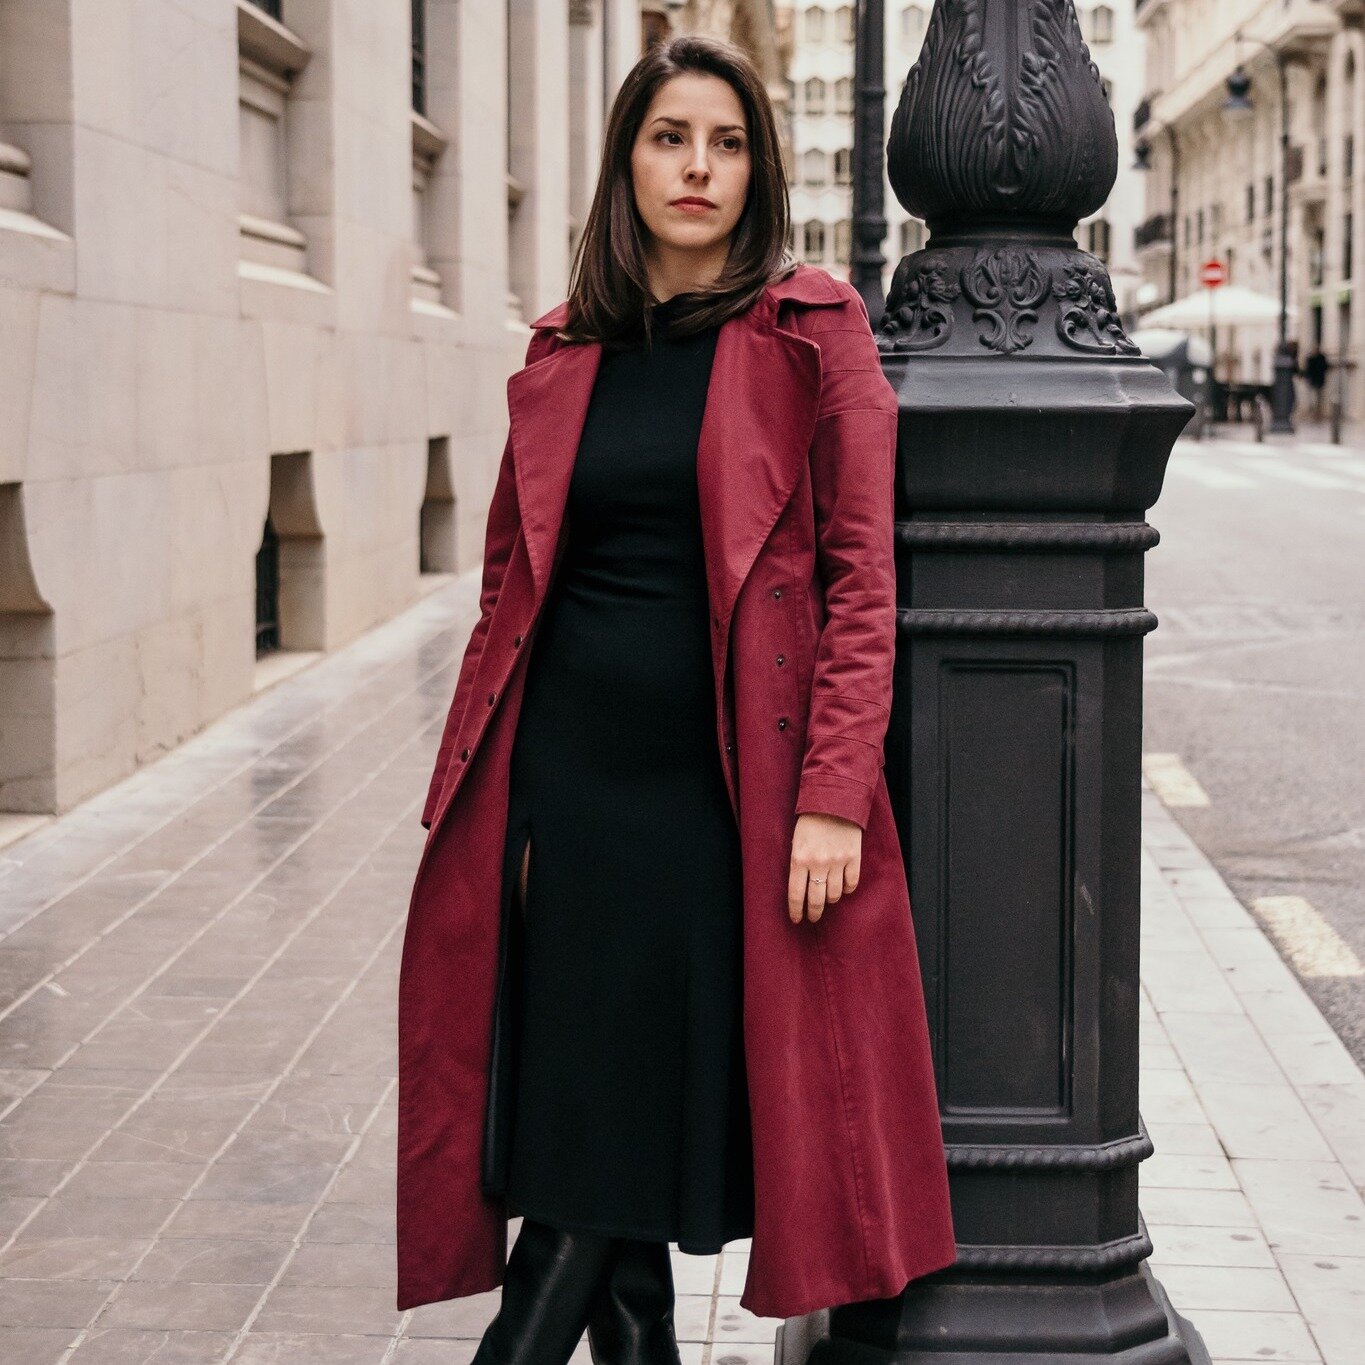 Discover timeless elegance with our Marlene Trench Coat, a limited edition gem that will light up your office outfits. ✨ Because we believe in enduring quality, we create unique pieces to build your perfect wardrobe foundation. Dare to stand out with